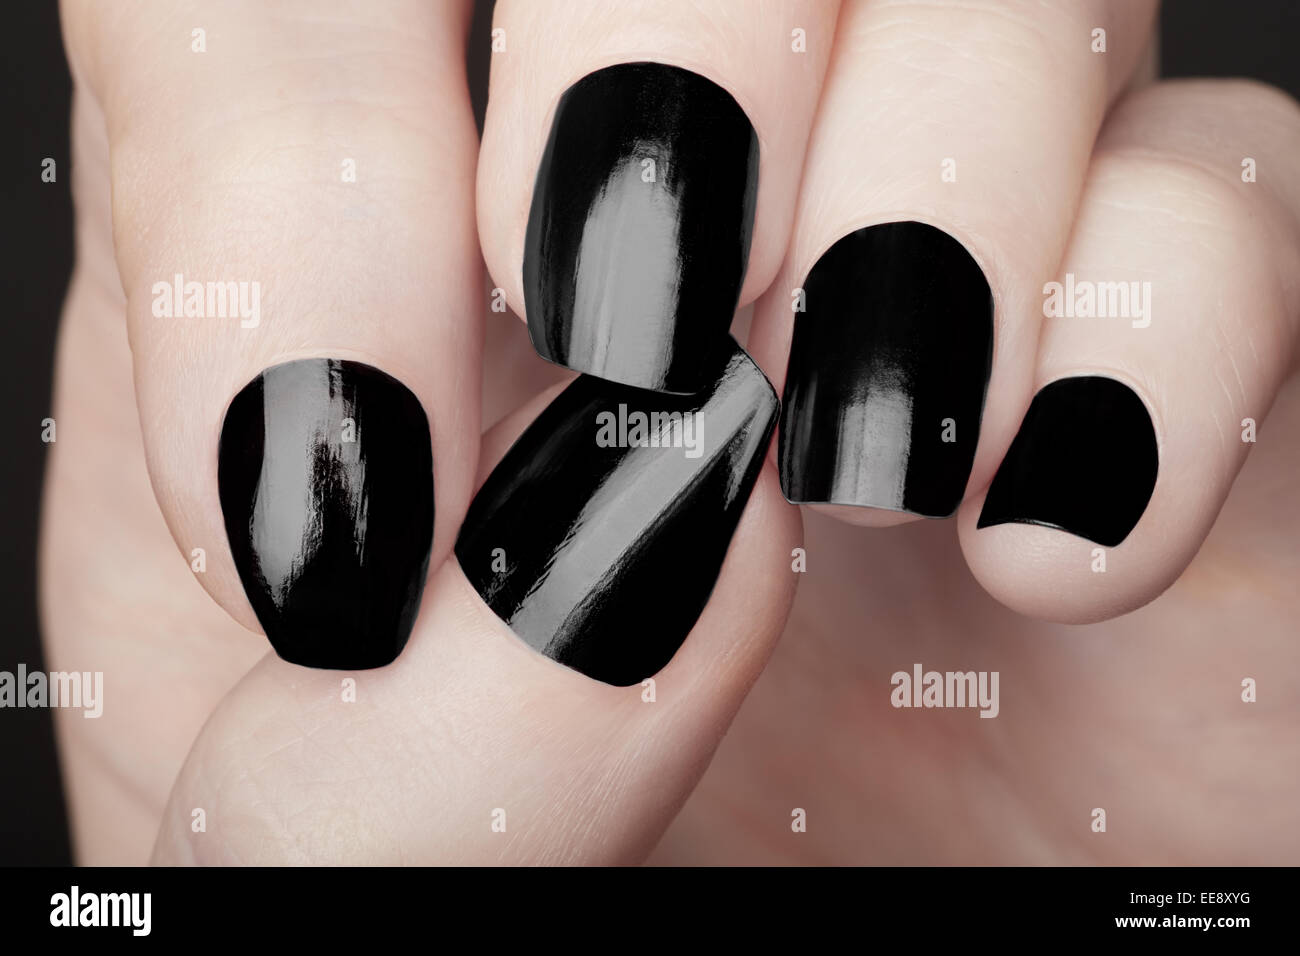 manicure on female hands with black nail polish EE8XYG